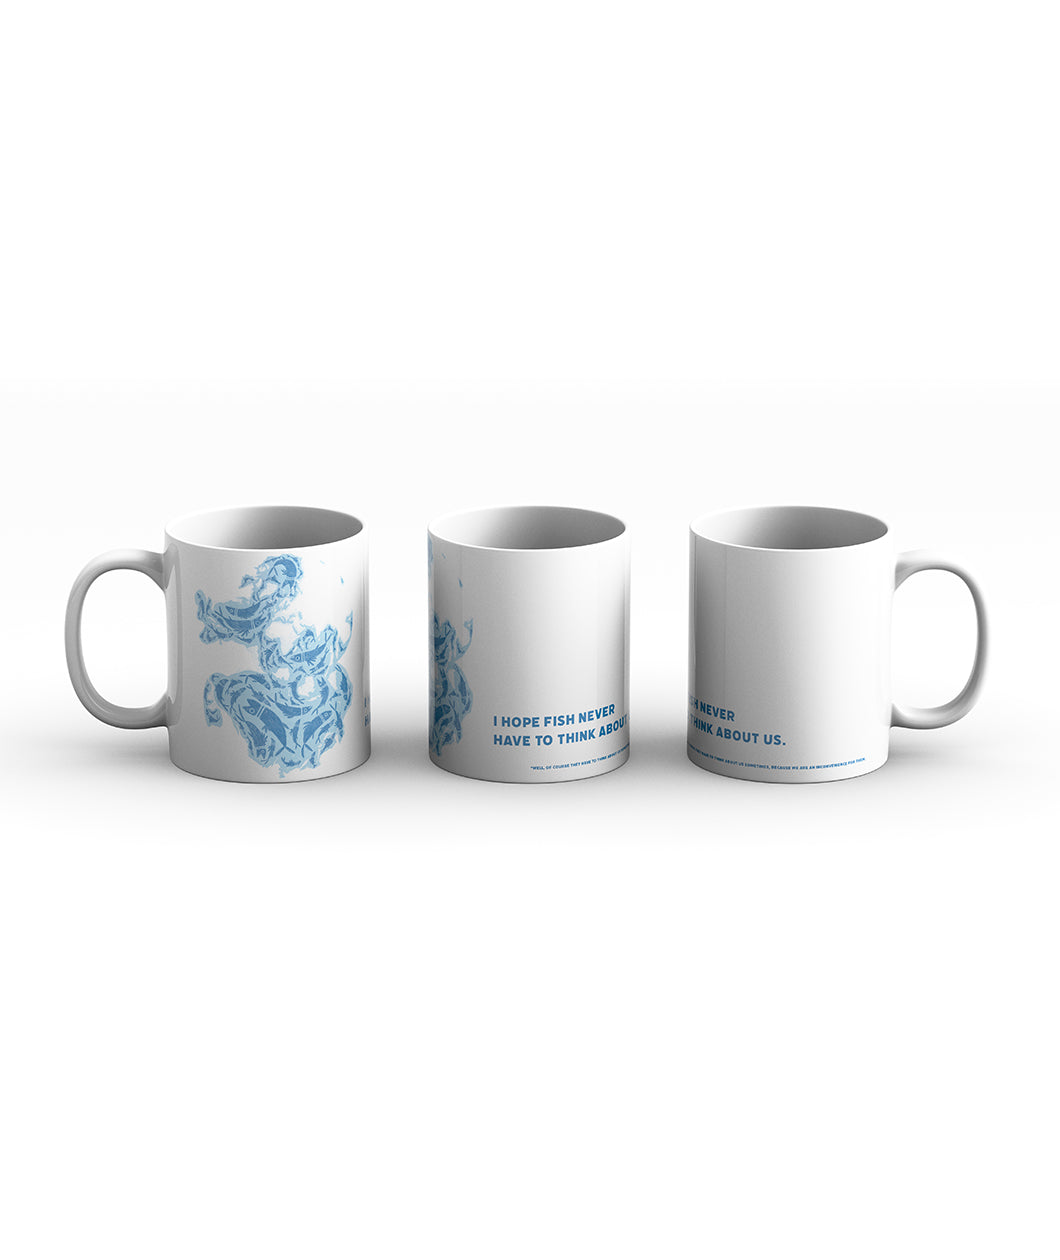 Three mugs sit side by side each showing a different portion of the 